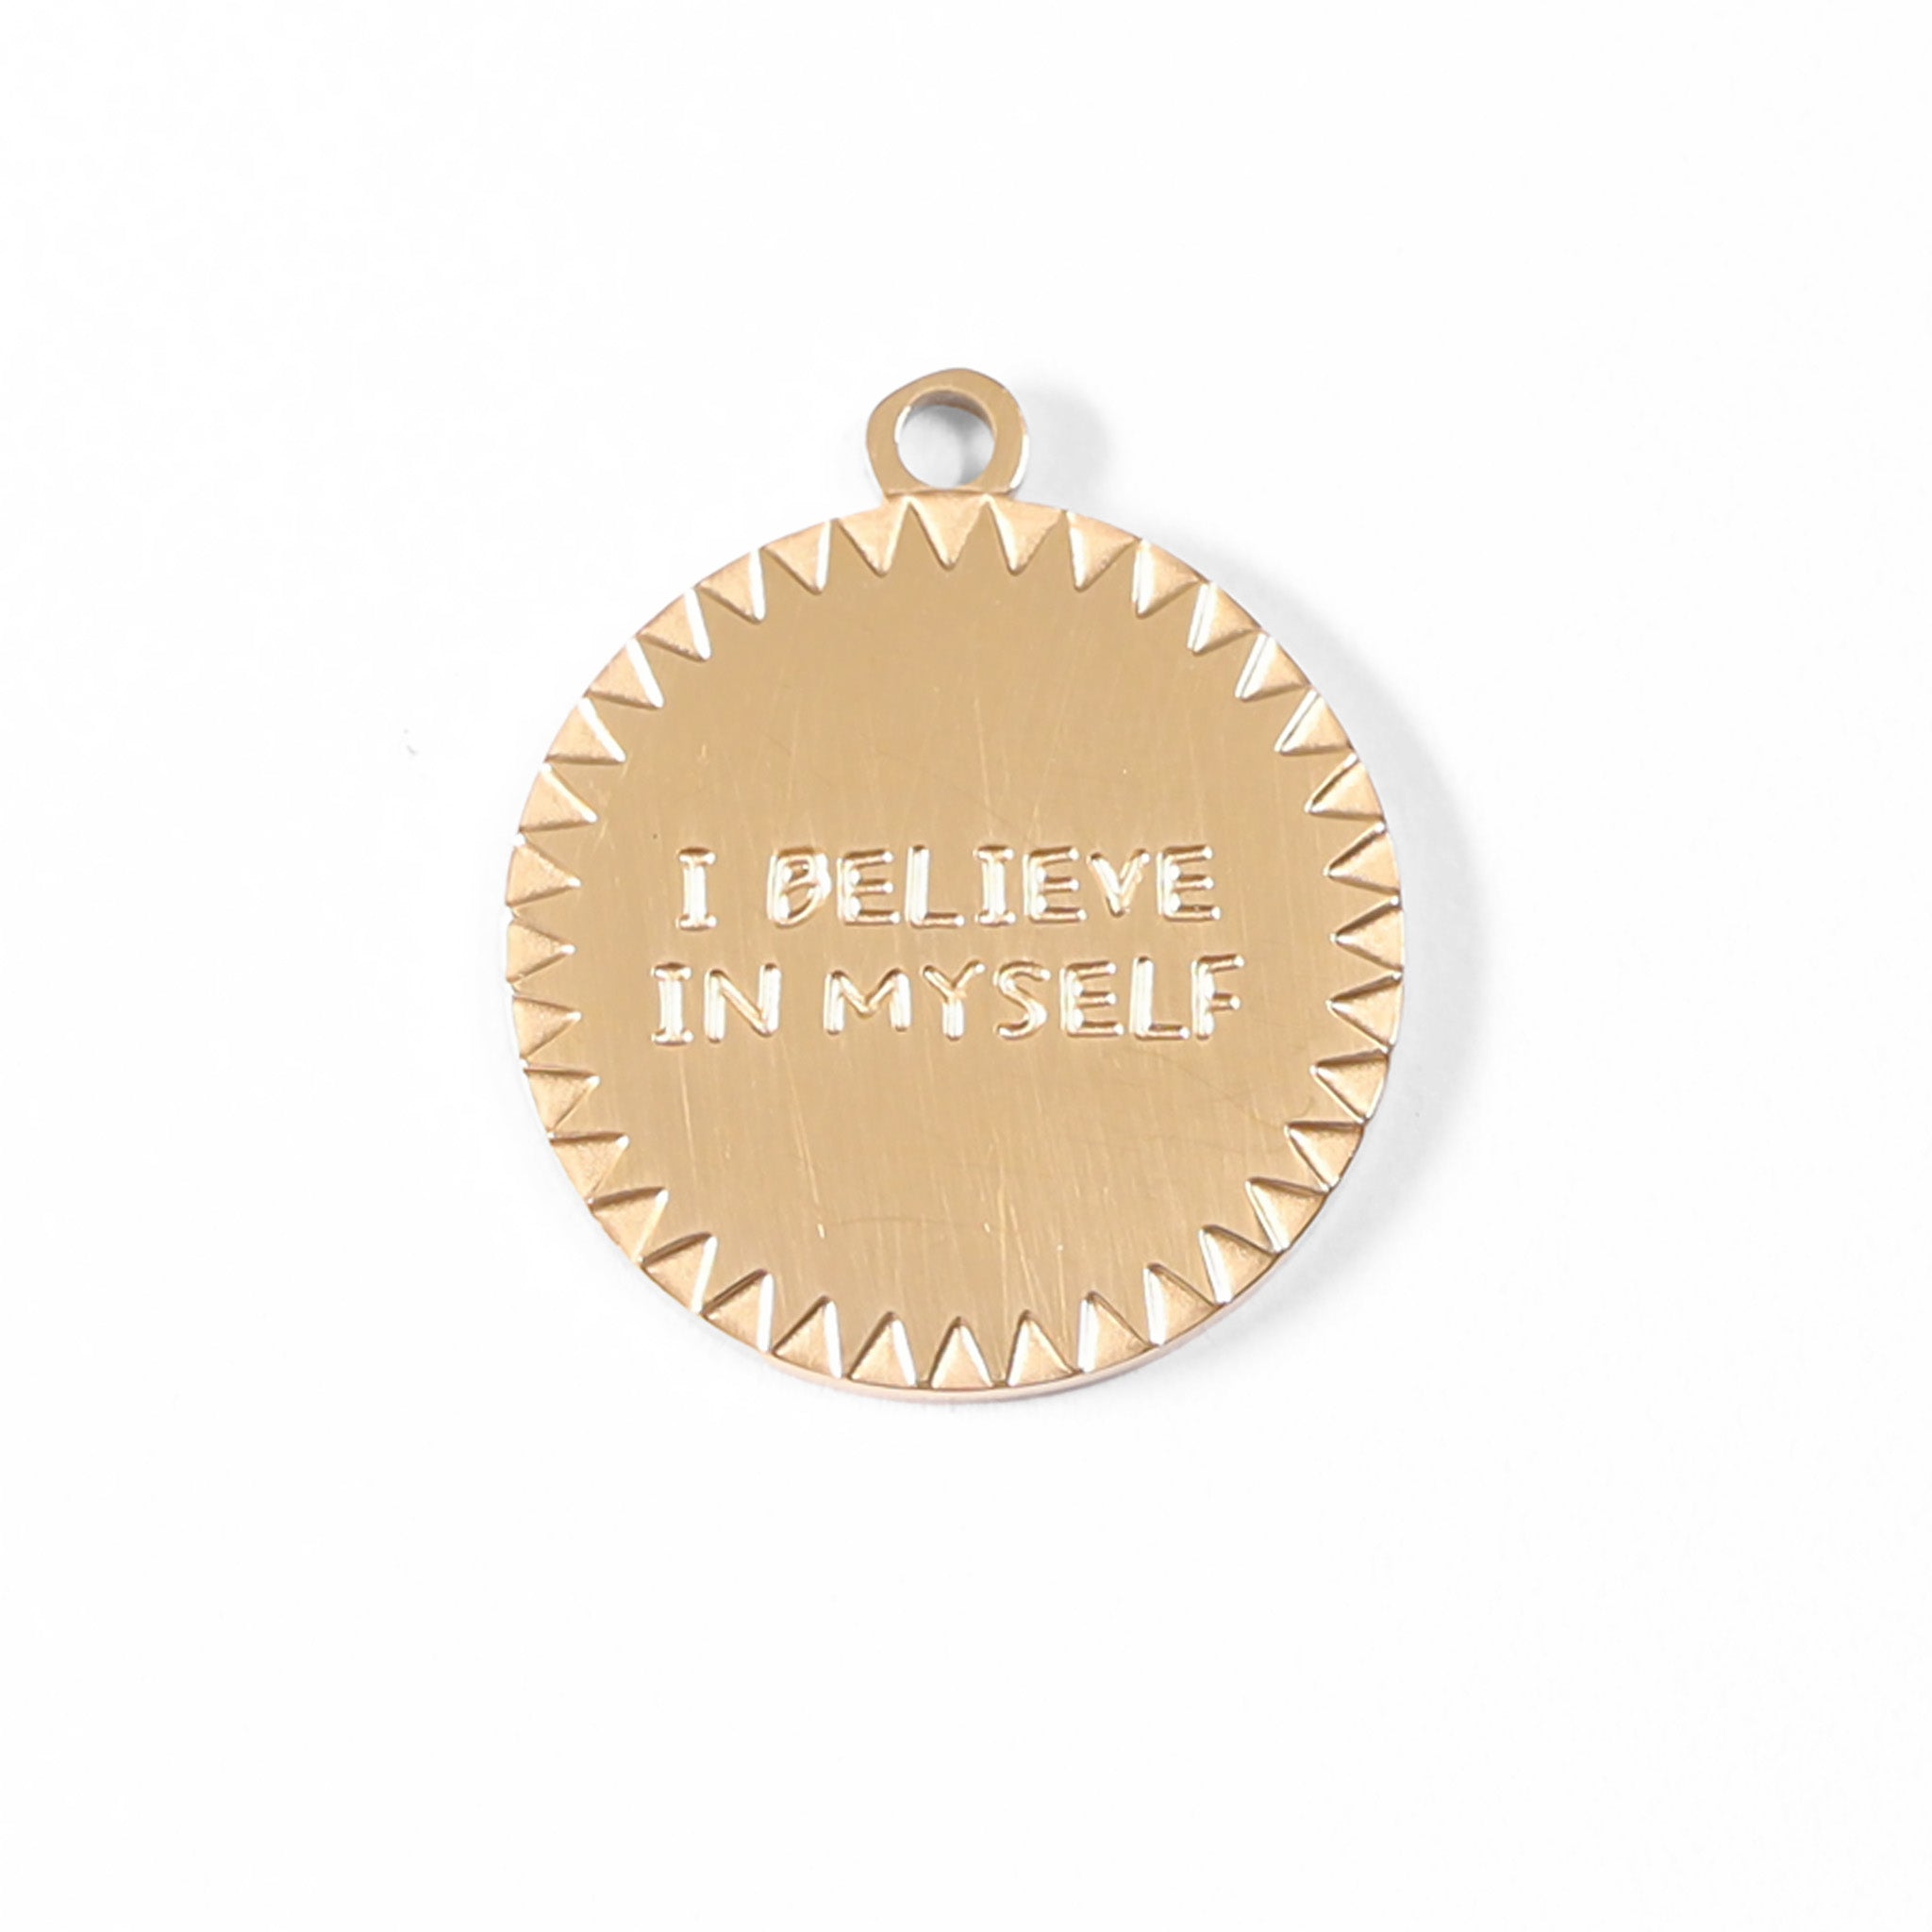 18K Gold PVD Stainless Steel "I Believe In Myself" Charm / PDL0021